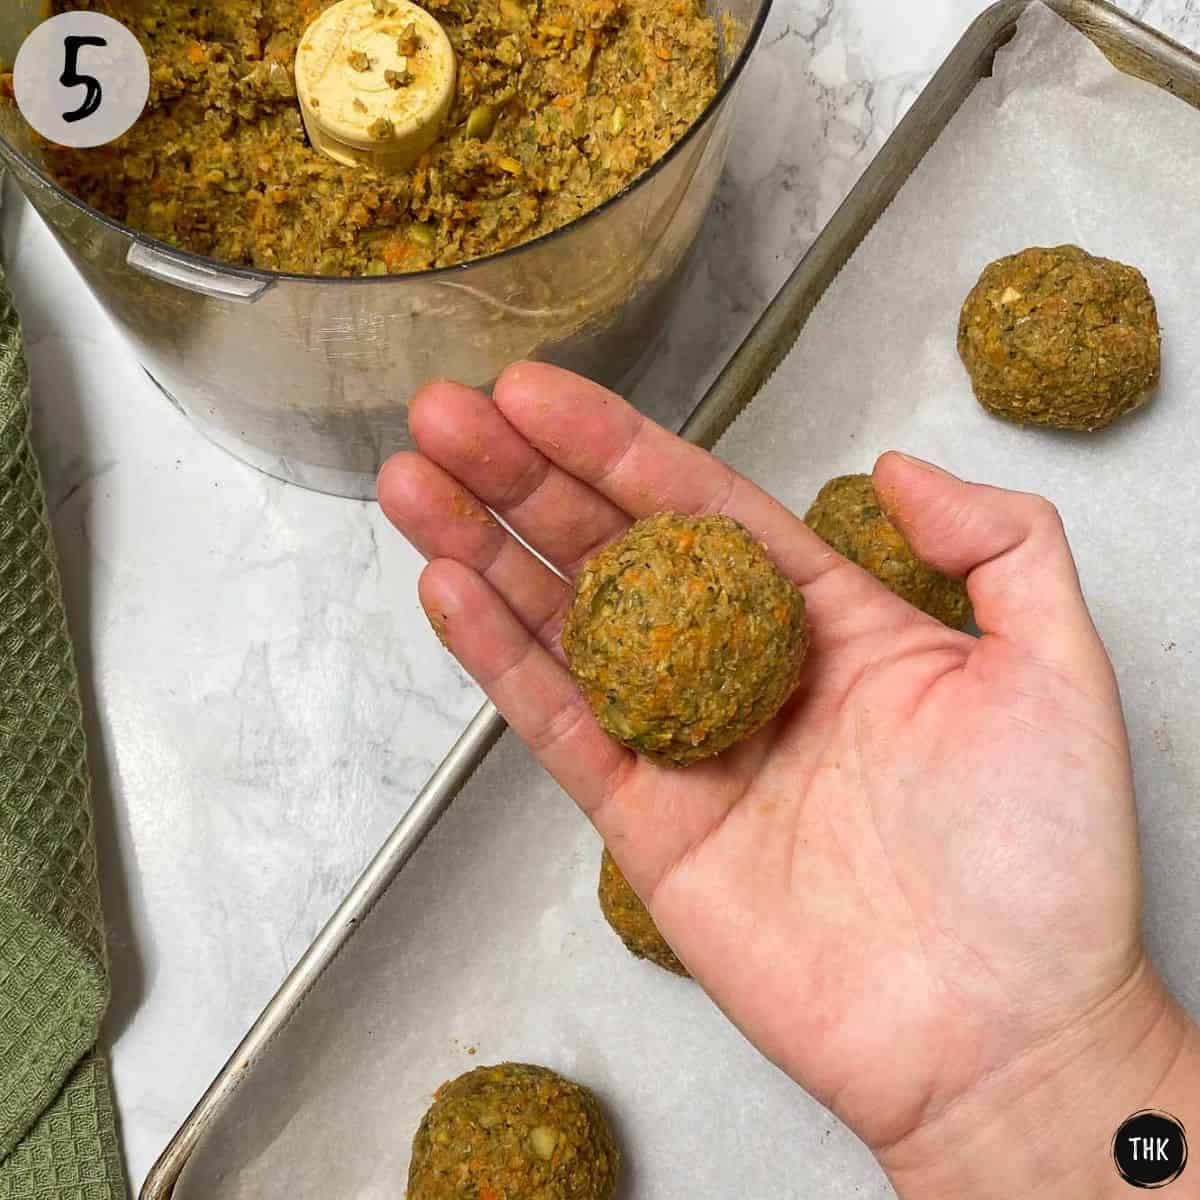 Hand holding up rolled uncooked vegan meatball.